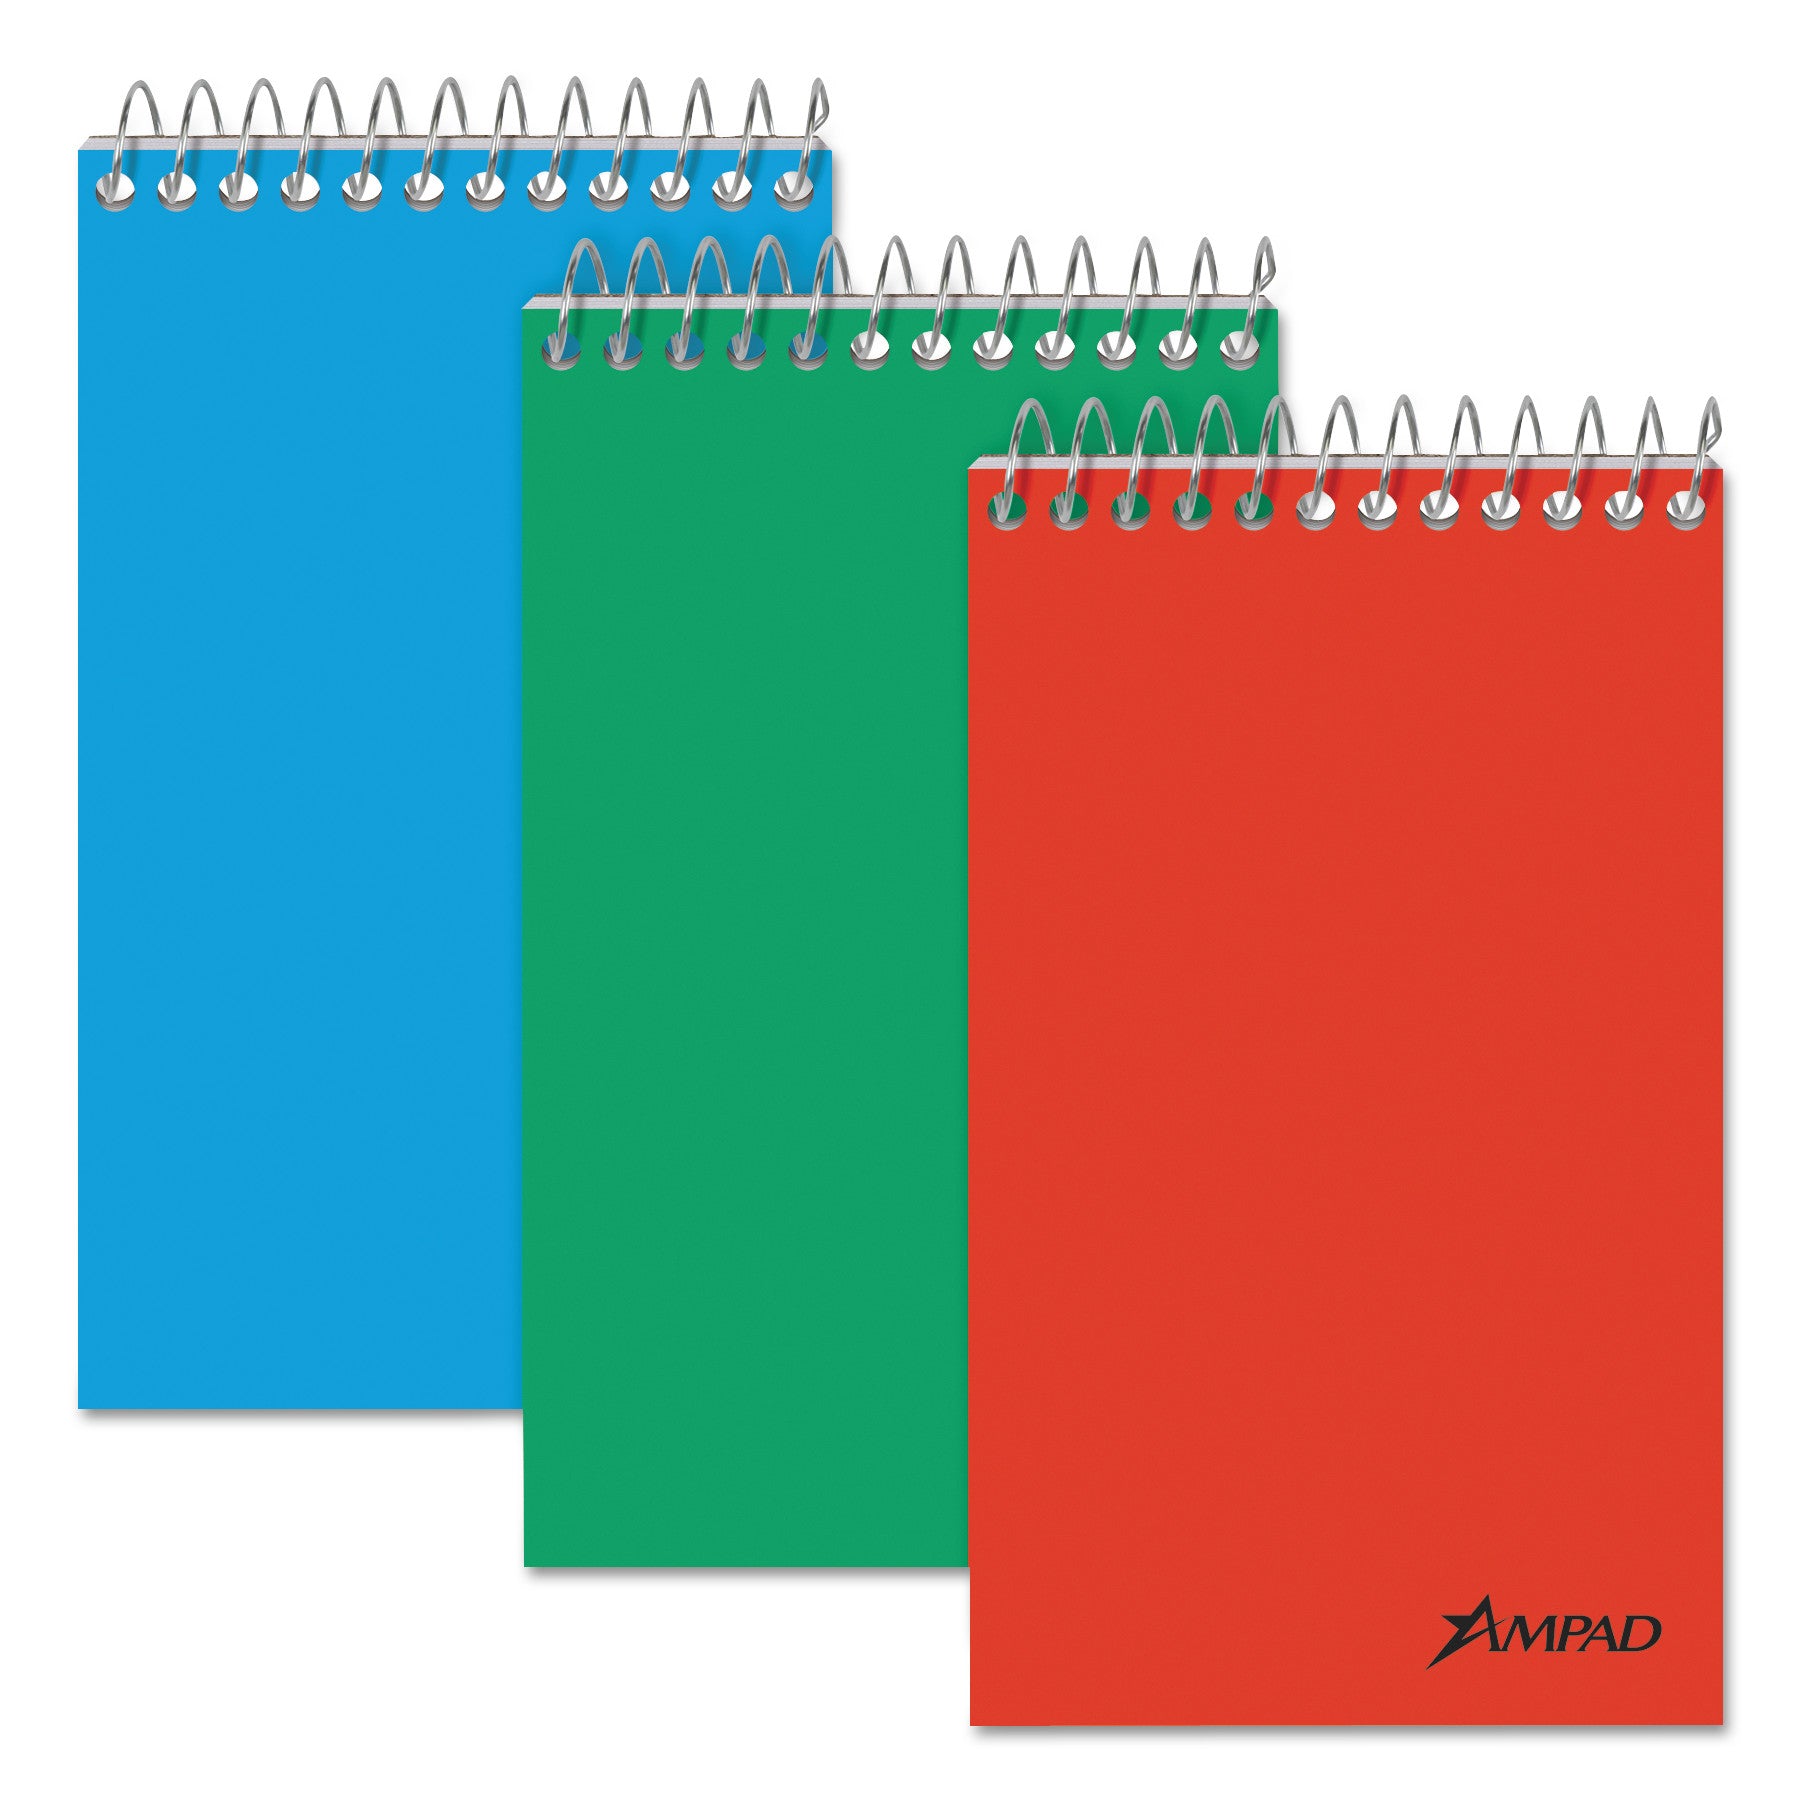 Memo Pads, Narrow Rule, Assorted Cover Colors, 60 White 3 x 5 Sheets, 3/Pack - 